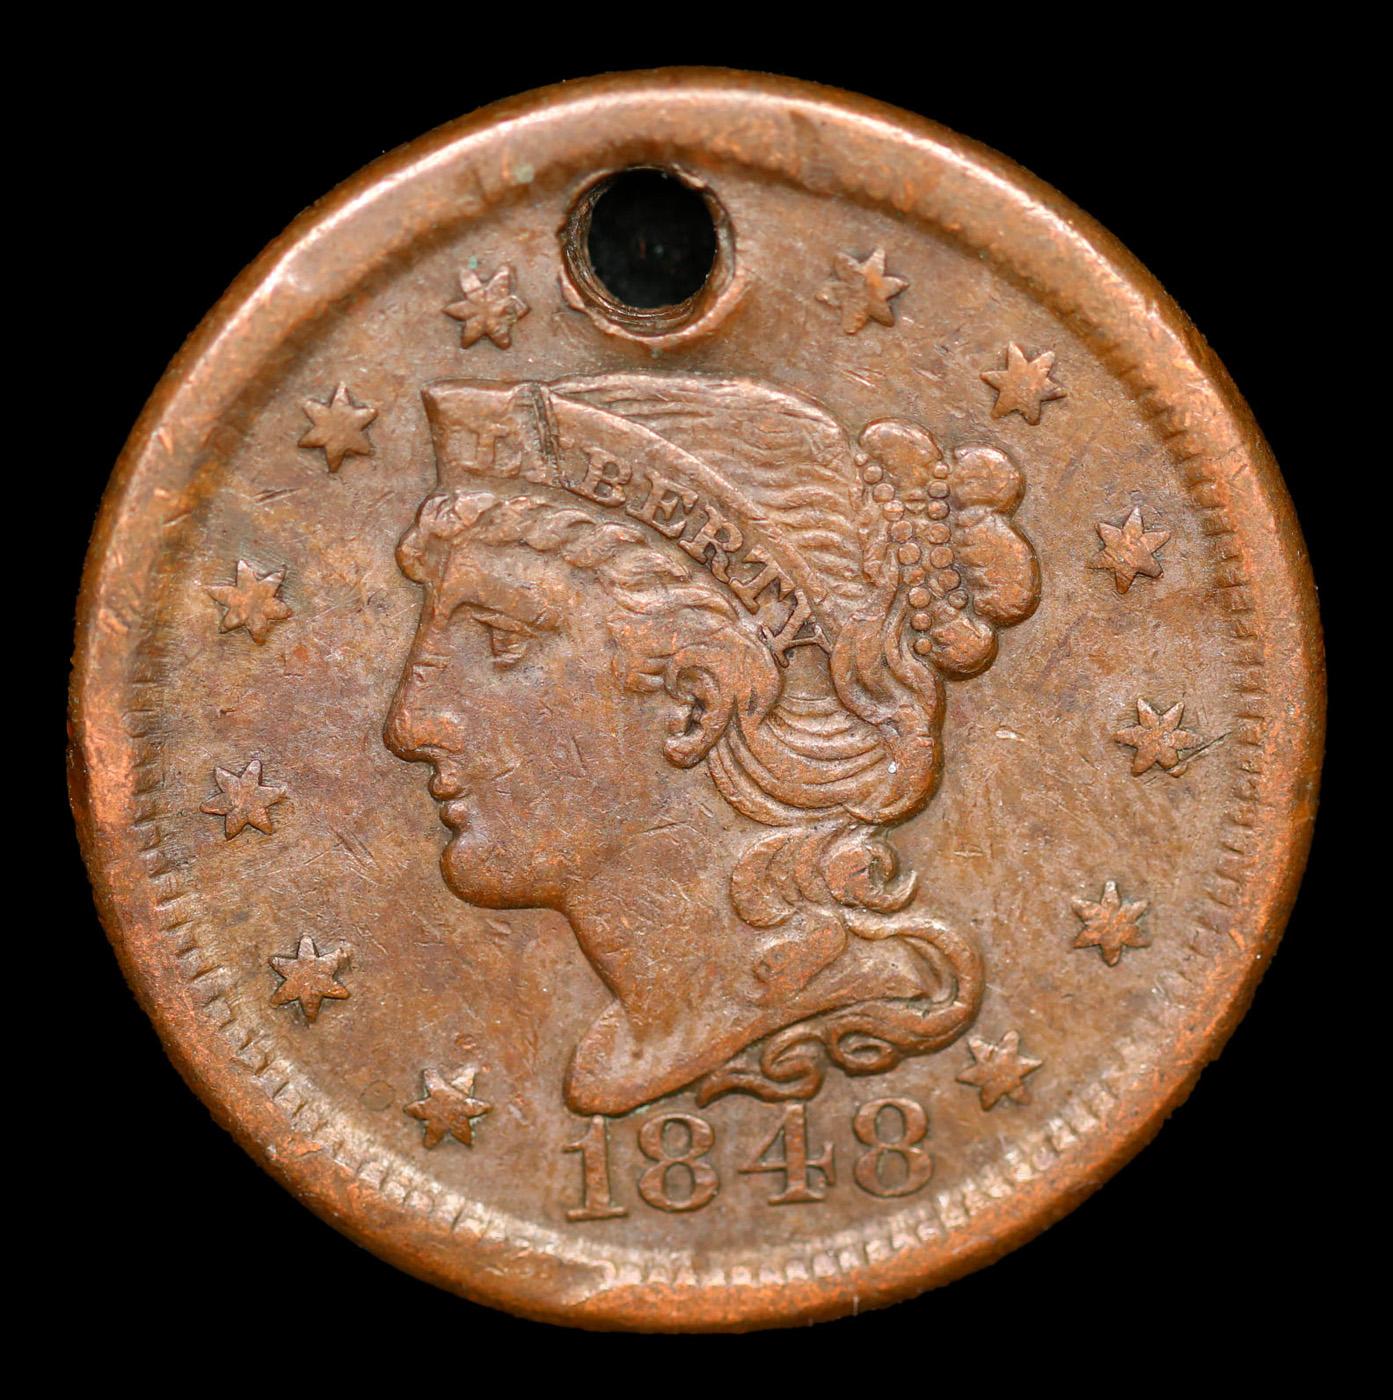 1848 Braided Hair Large Cent 1c Grades xf details